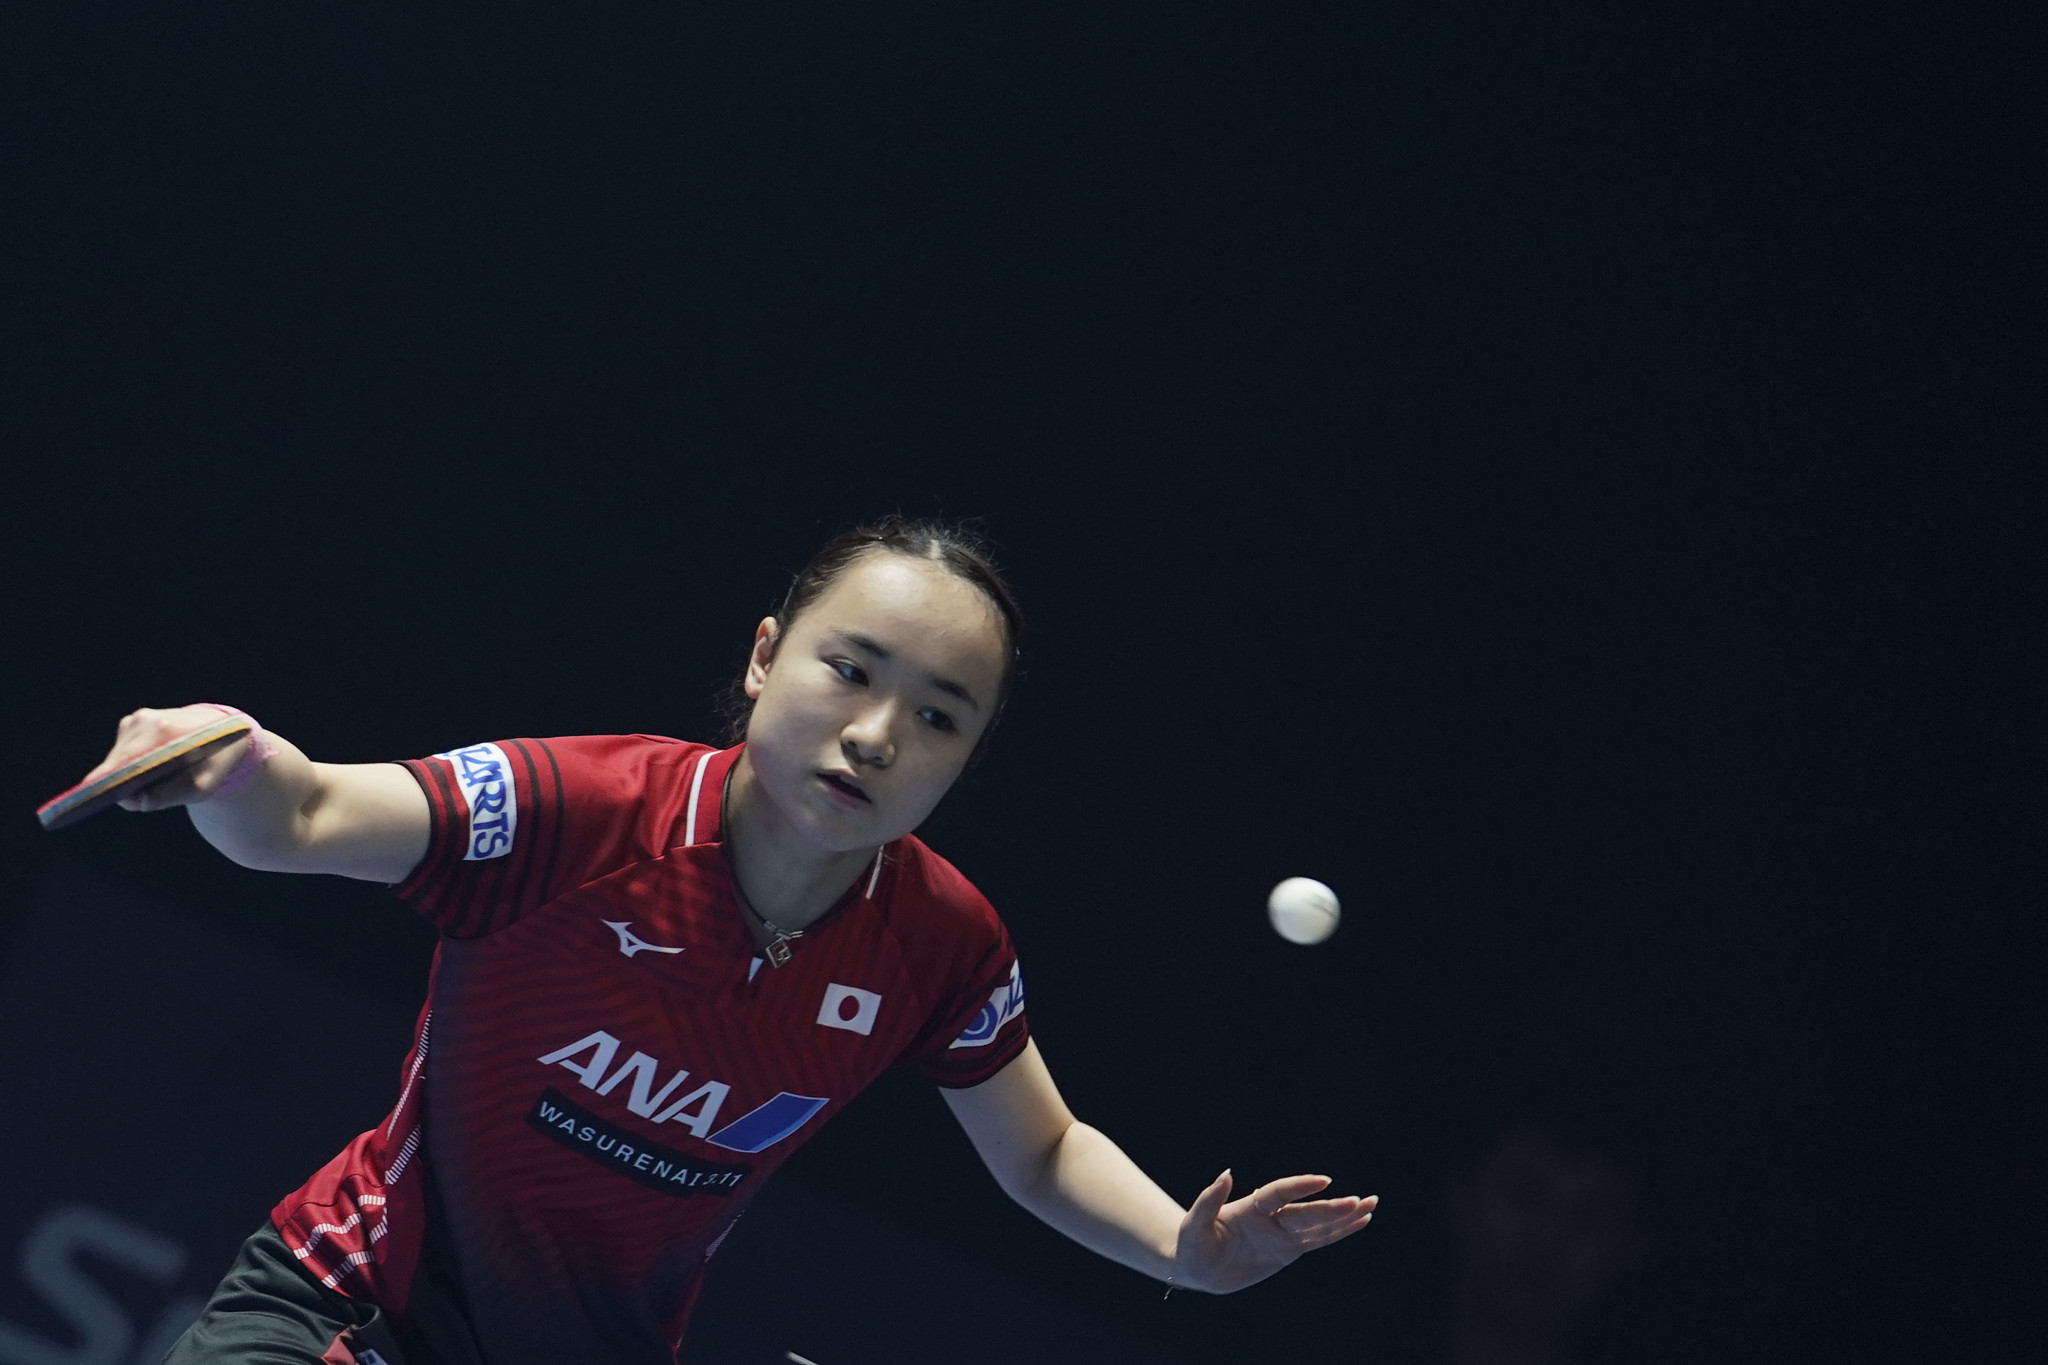 World number three Mima Ito will feature in the Japanese women's table tennis team at Tokyo 2020 ©Getty Images